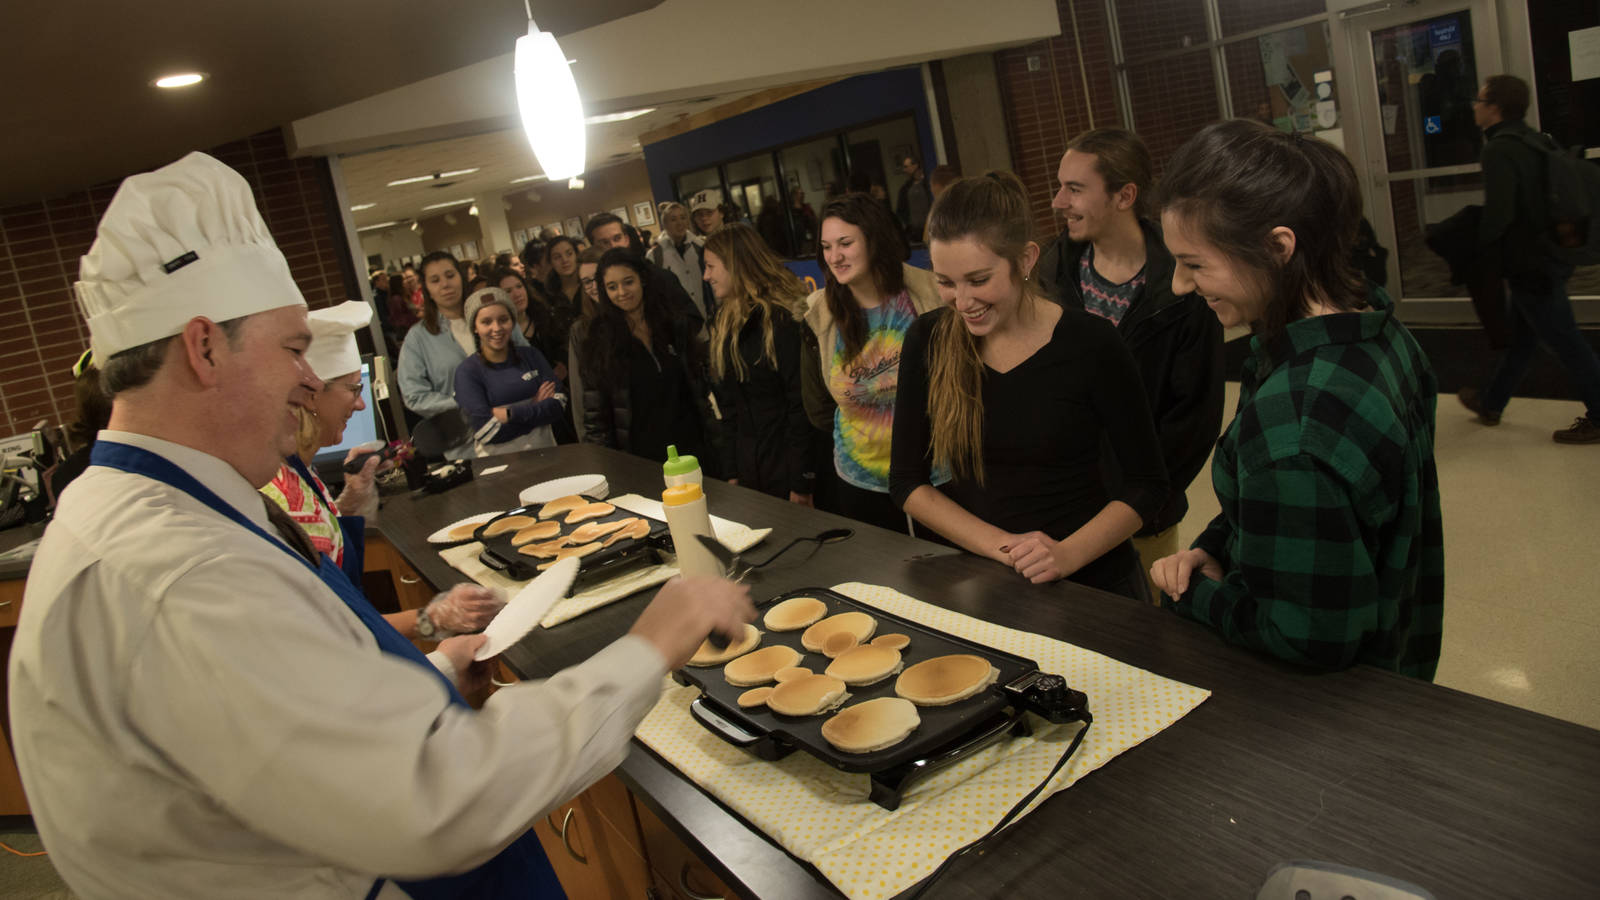 Chancellor Jim Schmidt flips pancakes for hungry students during finals week.